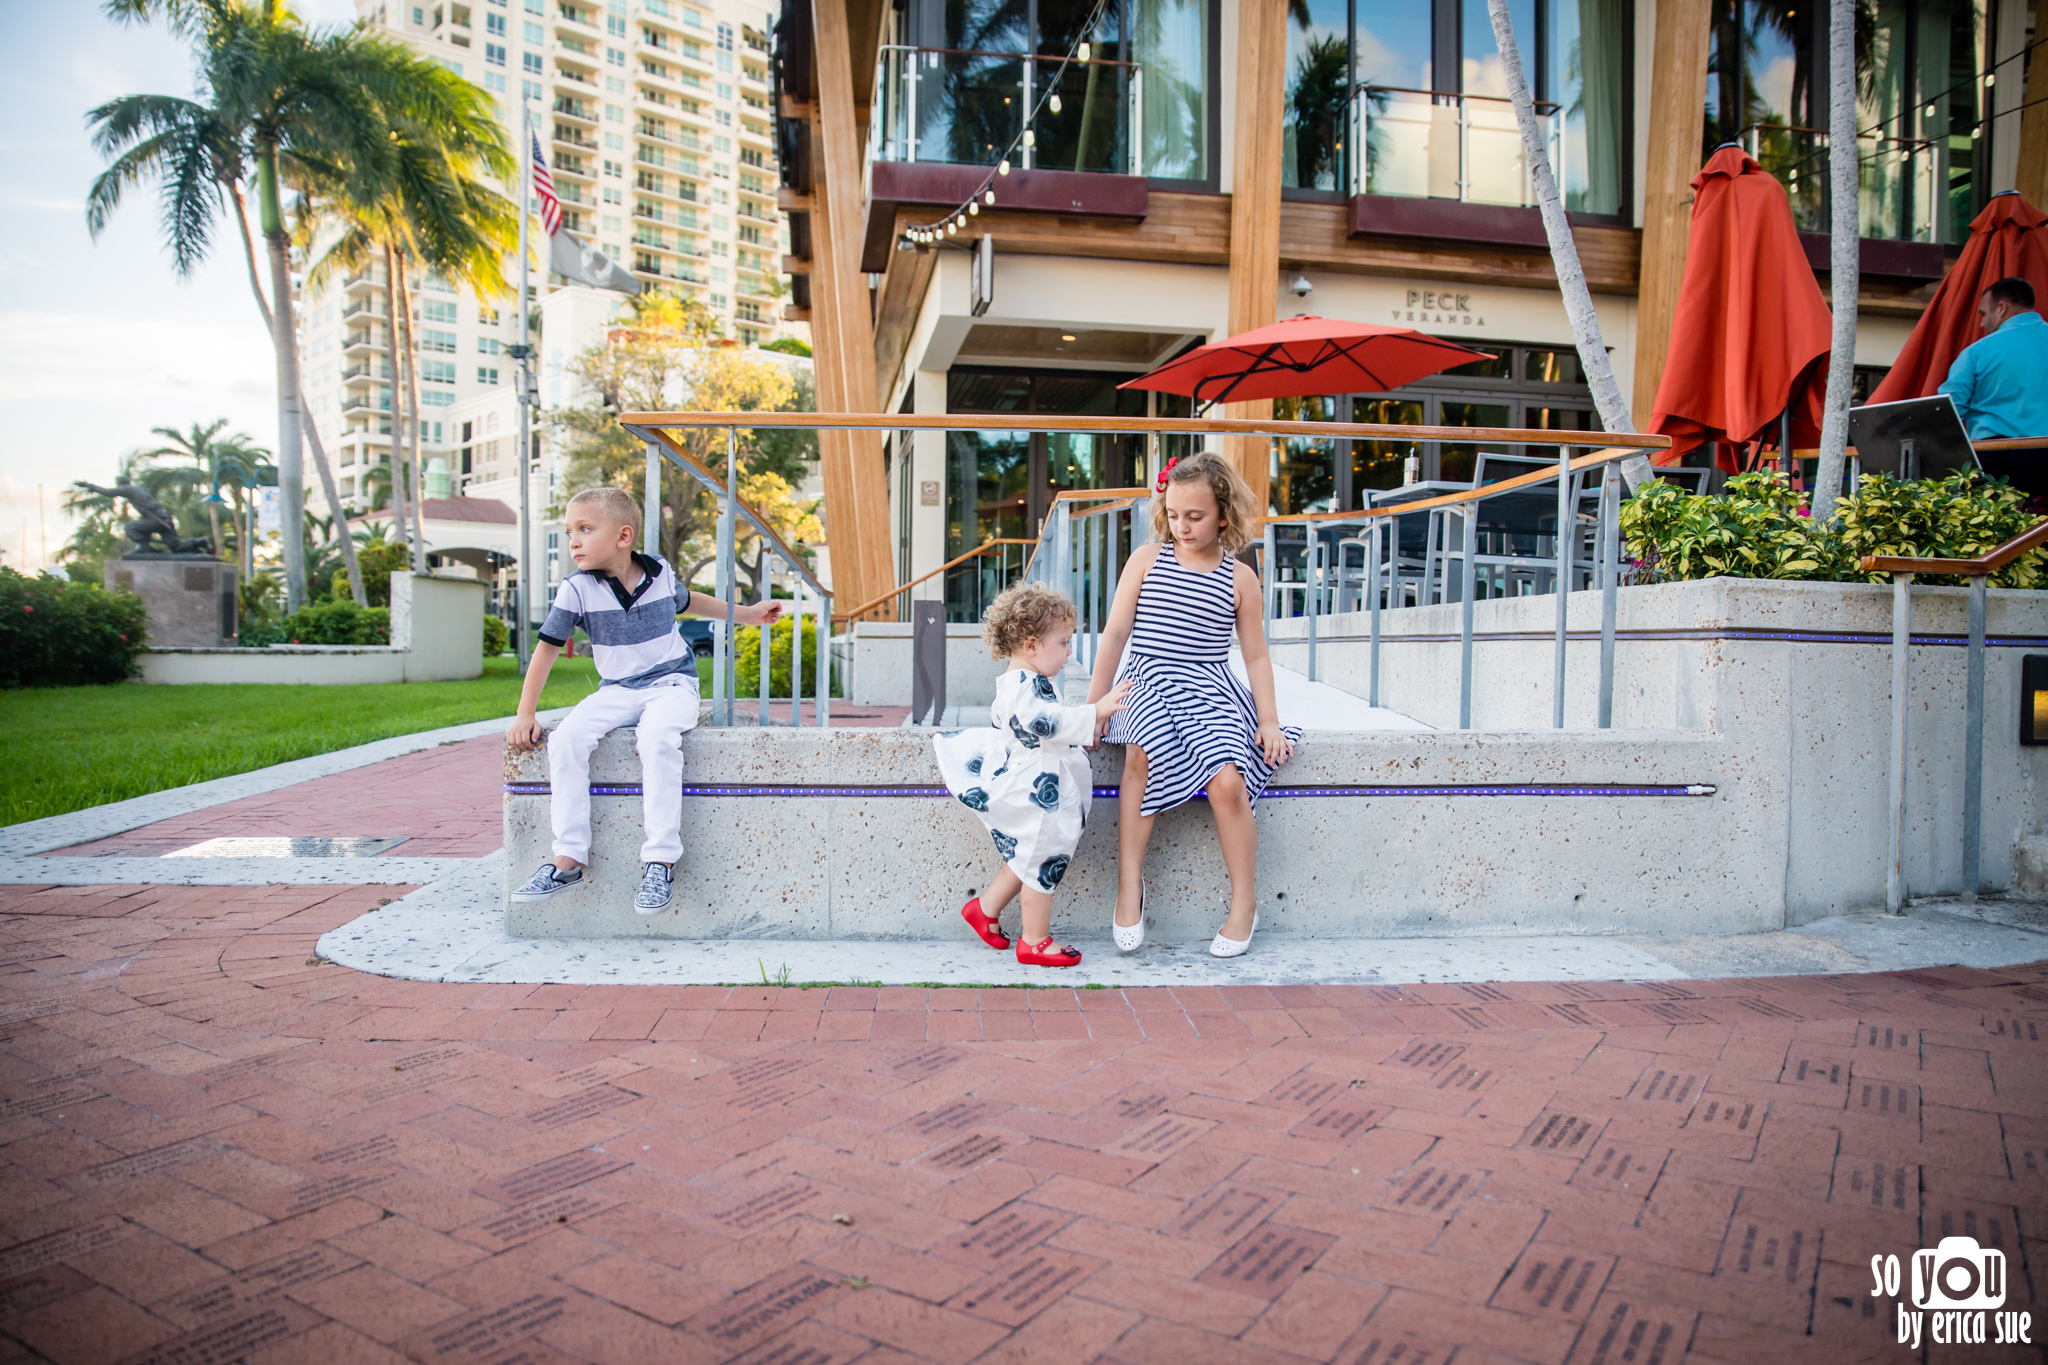 ft-lauderdale-lifestyle-family-photography-so-you-by-erica-sue-0331.jpg